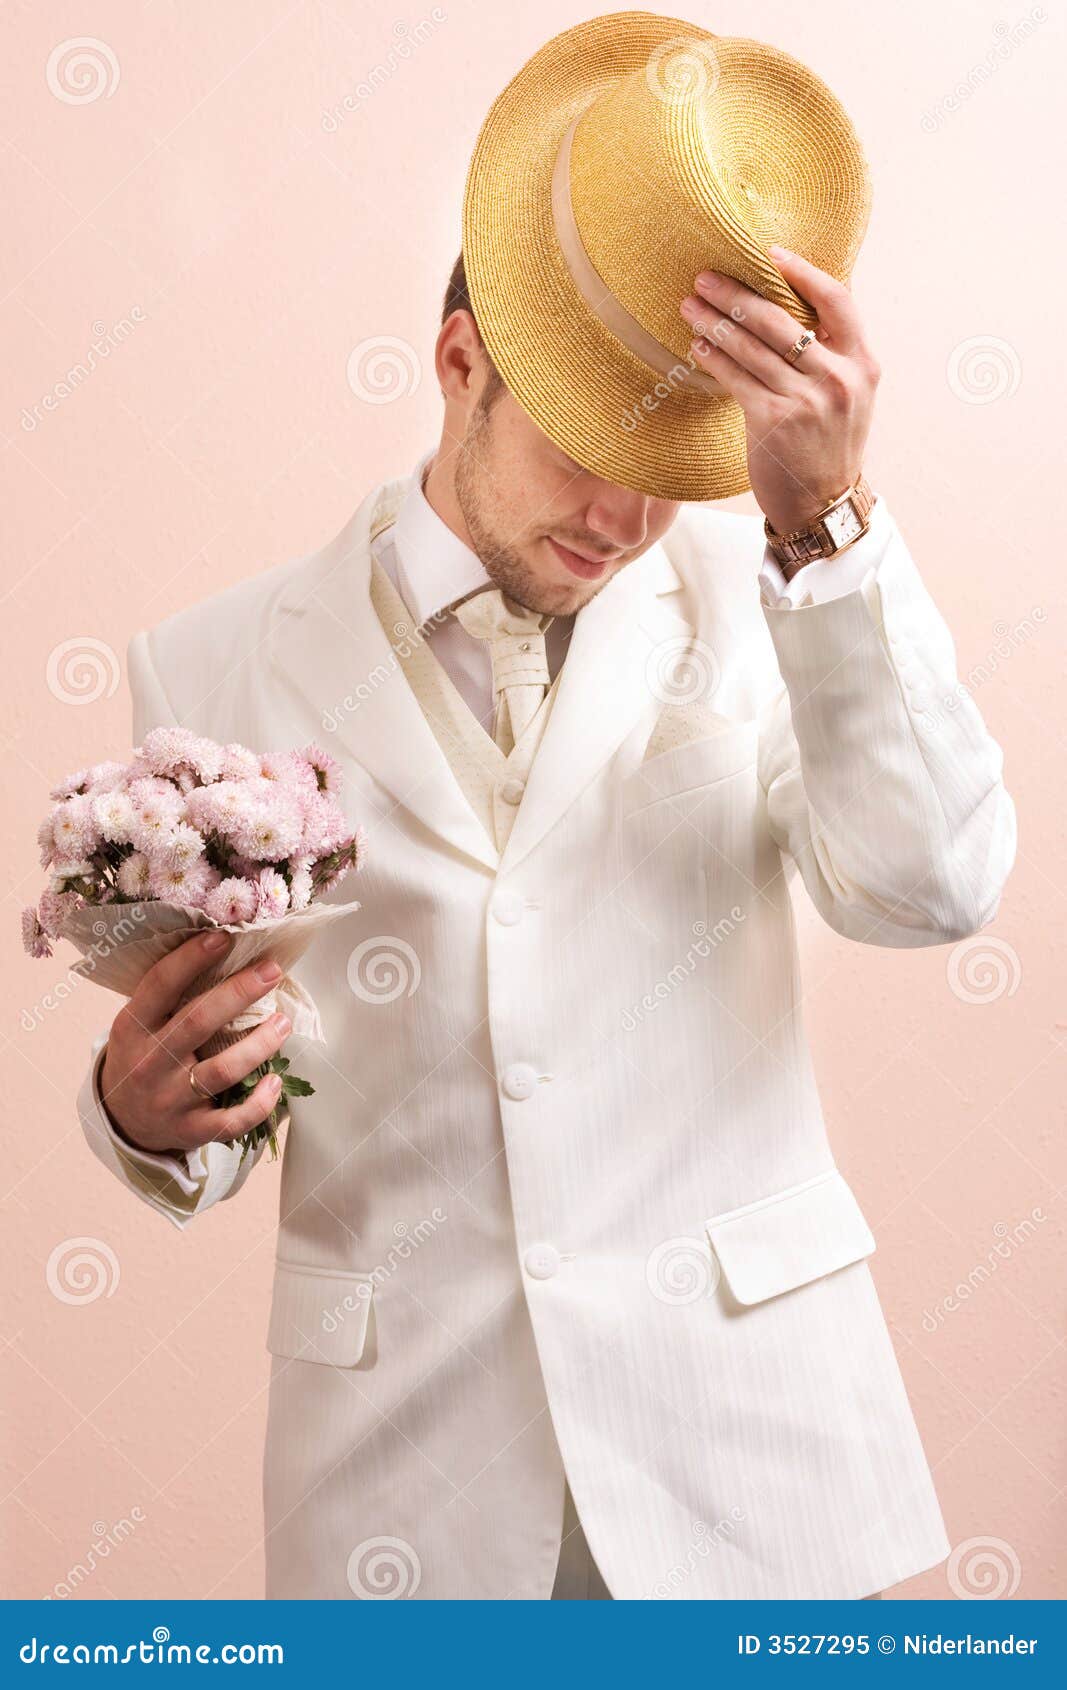 Vintage portrait of groom. Young groom in wedding wear with bouquet of chrysanthemum. Special pink toned photo f/x